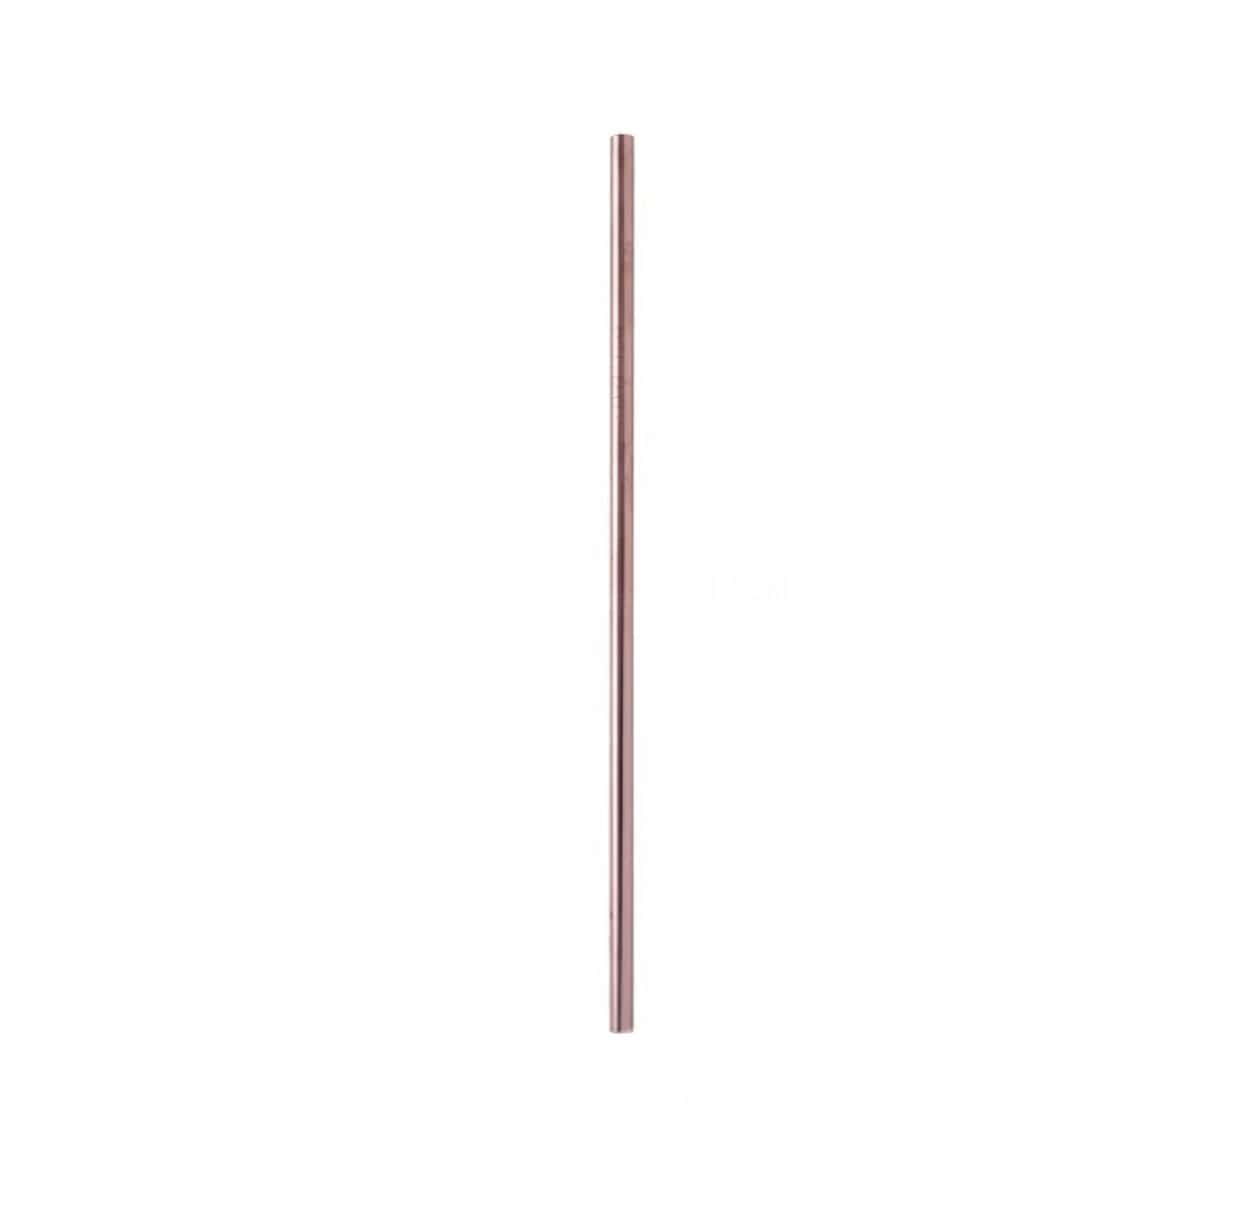 Helms Store Homewares Rose Gold Stainless Steel Reusable Straw (Gold, Rose Gold and Black)